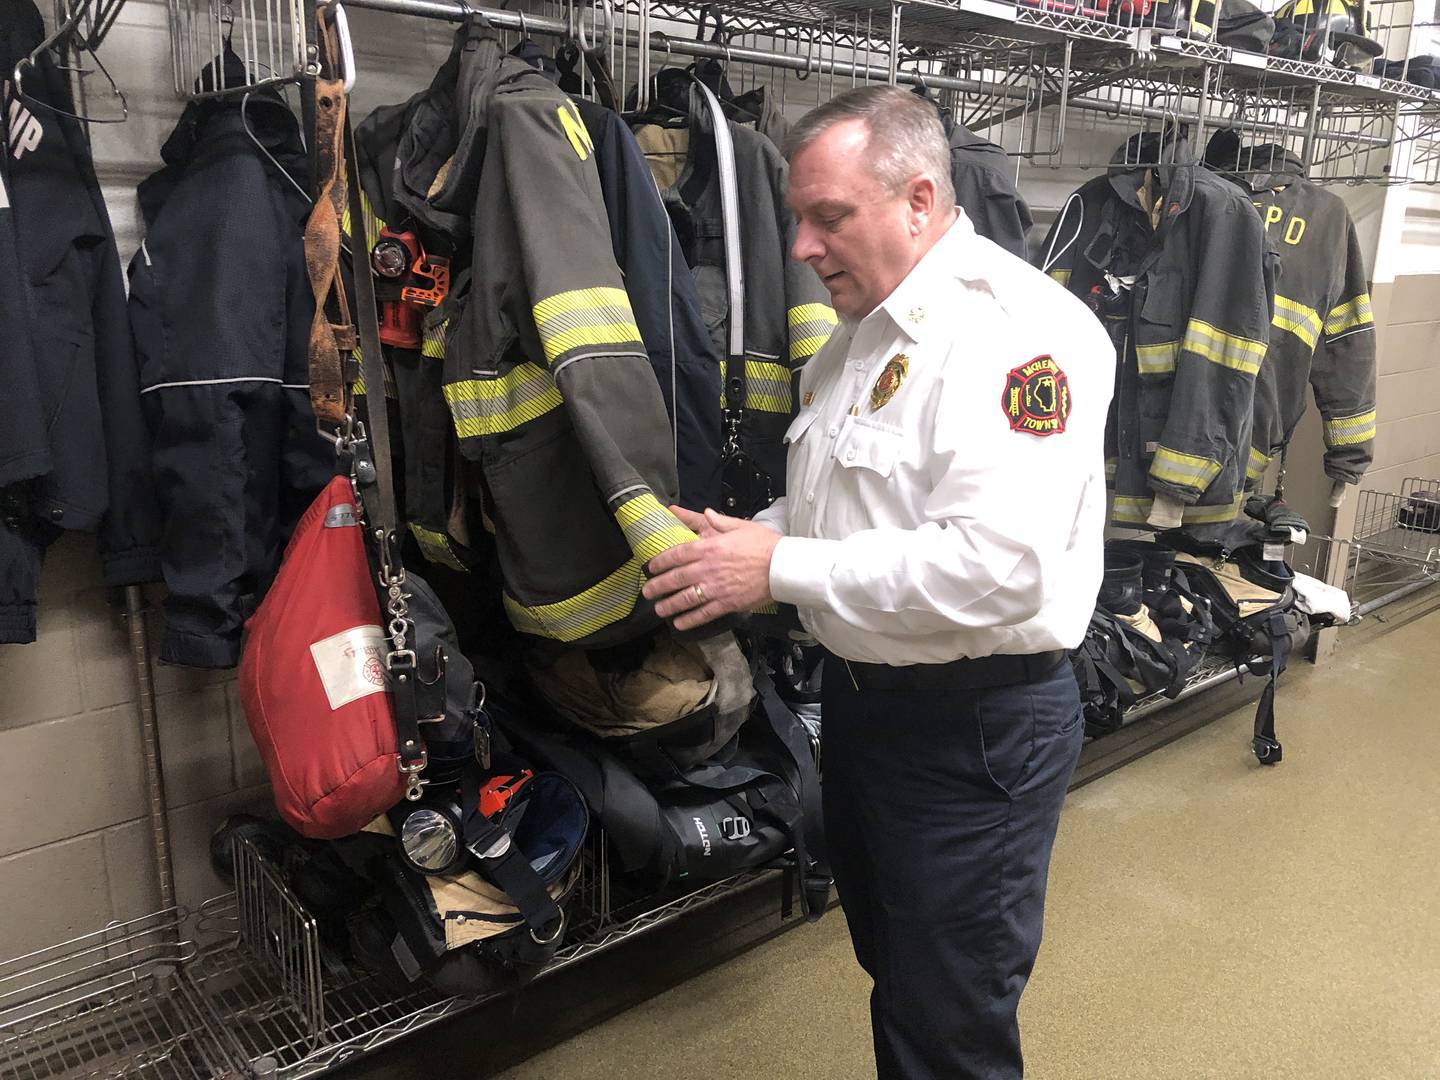 Modern turnout gear is not only fitted to the firefighter, but is washed after every fire call to prevent particulates from getting into the air and clinging to the skin, said HcHenry Township Fire Protection District Chief Rudy Horist on Jan. 23, 2023.